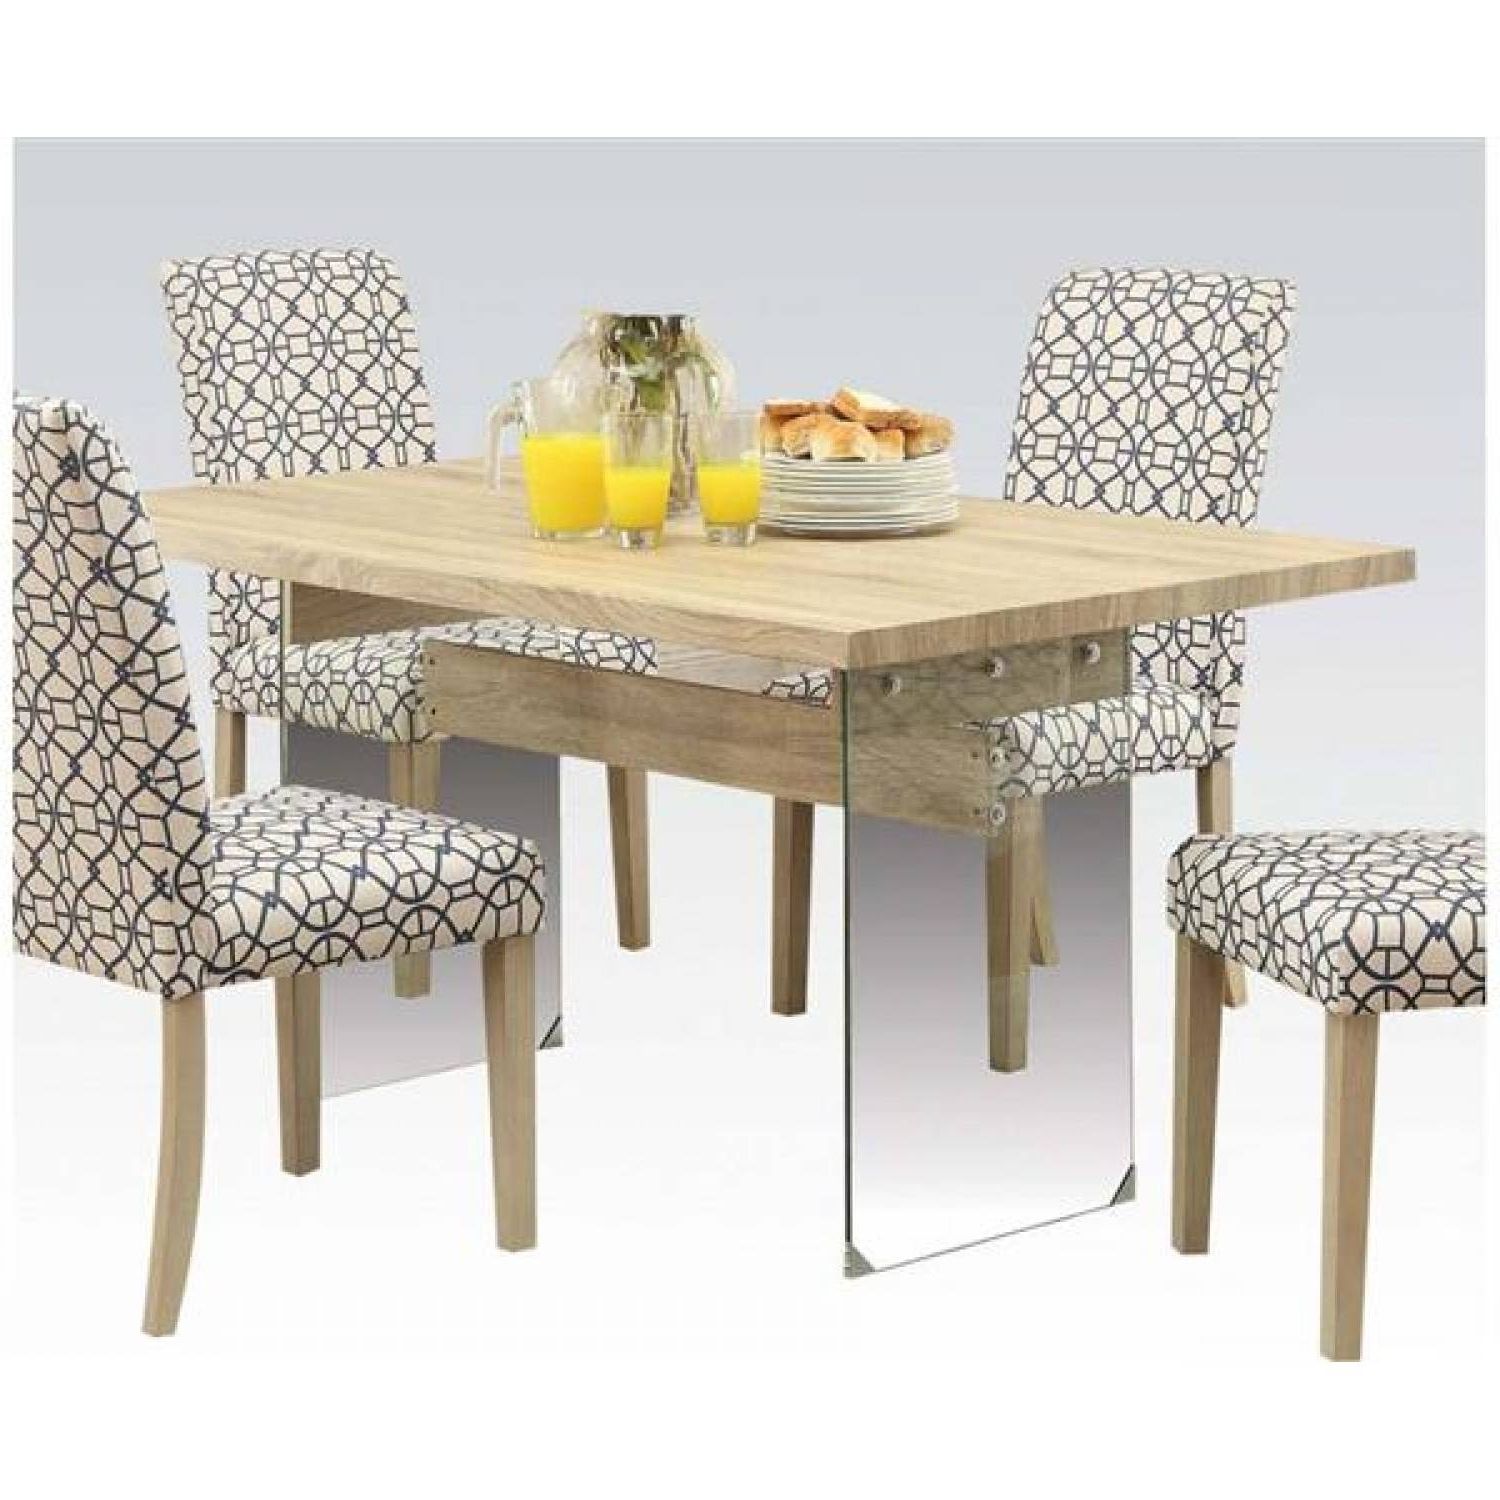 Glassden Light Oak Wood Glass Dining Table 5pc Set: Table & 4 Chairs Throughout Current Cheap Glass Dining Tables And 4 Chairs (View 22 of 25)